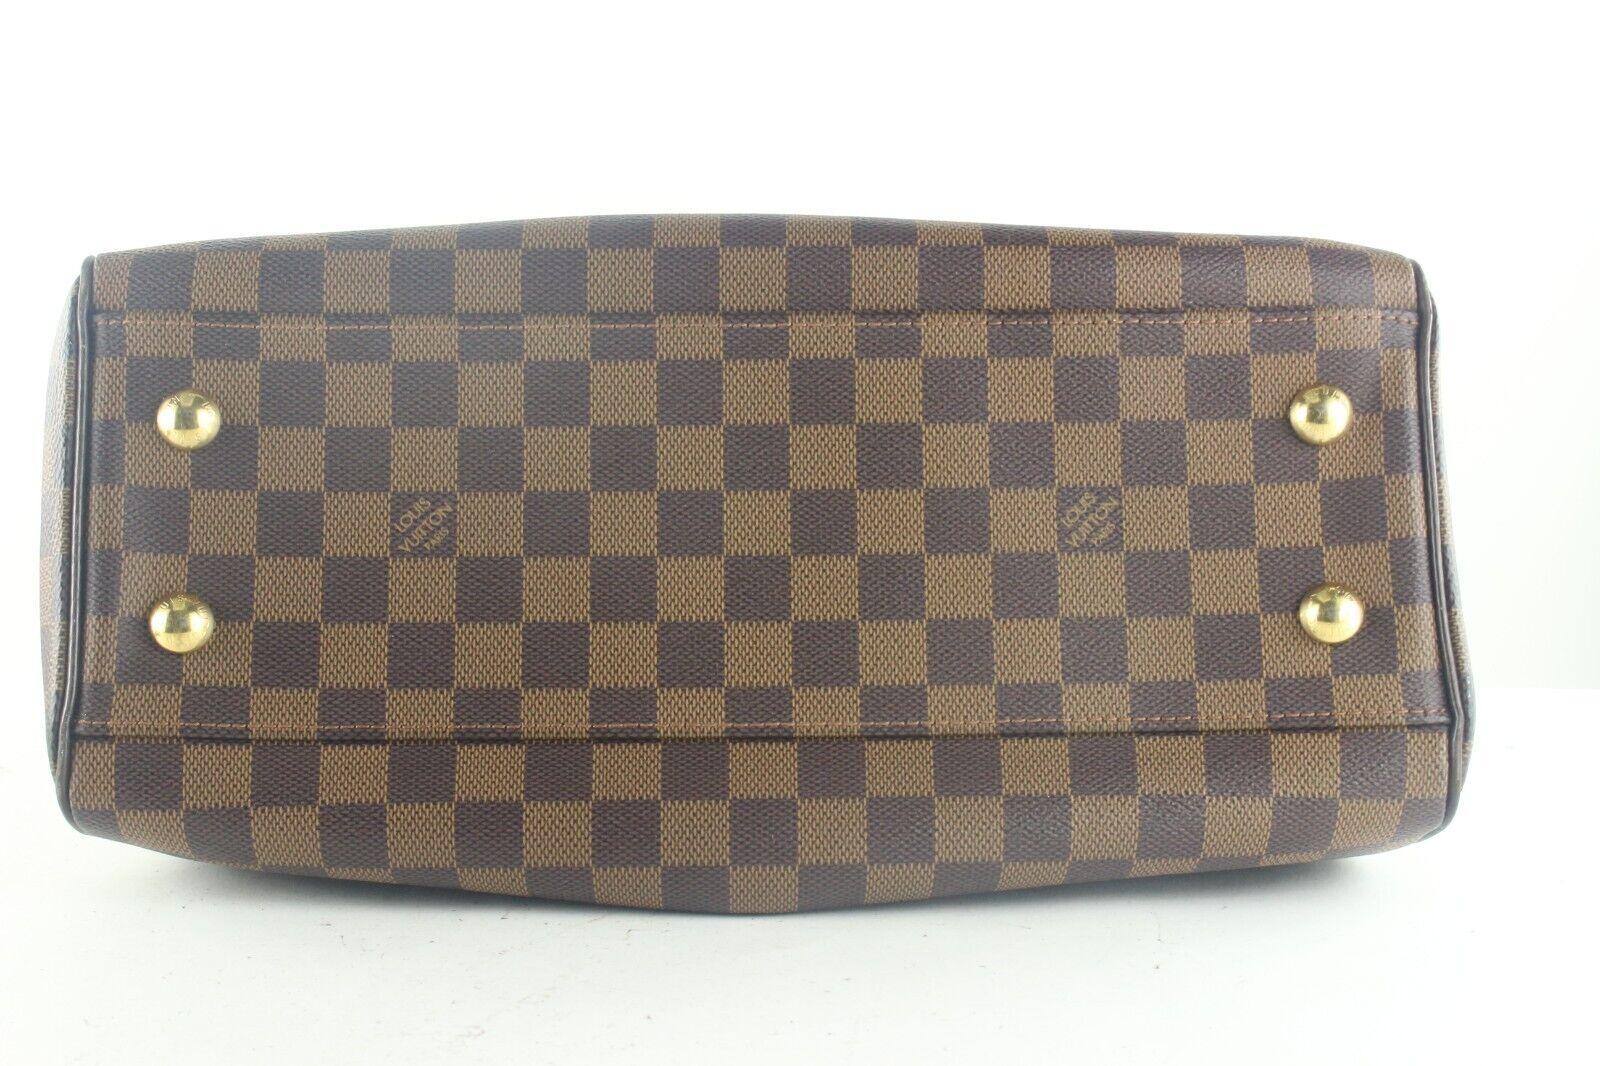 Brown Louis Vuitton Damier Trevi PM 2way with Strap 9LV920K For Sale